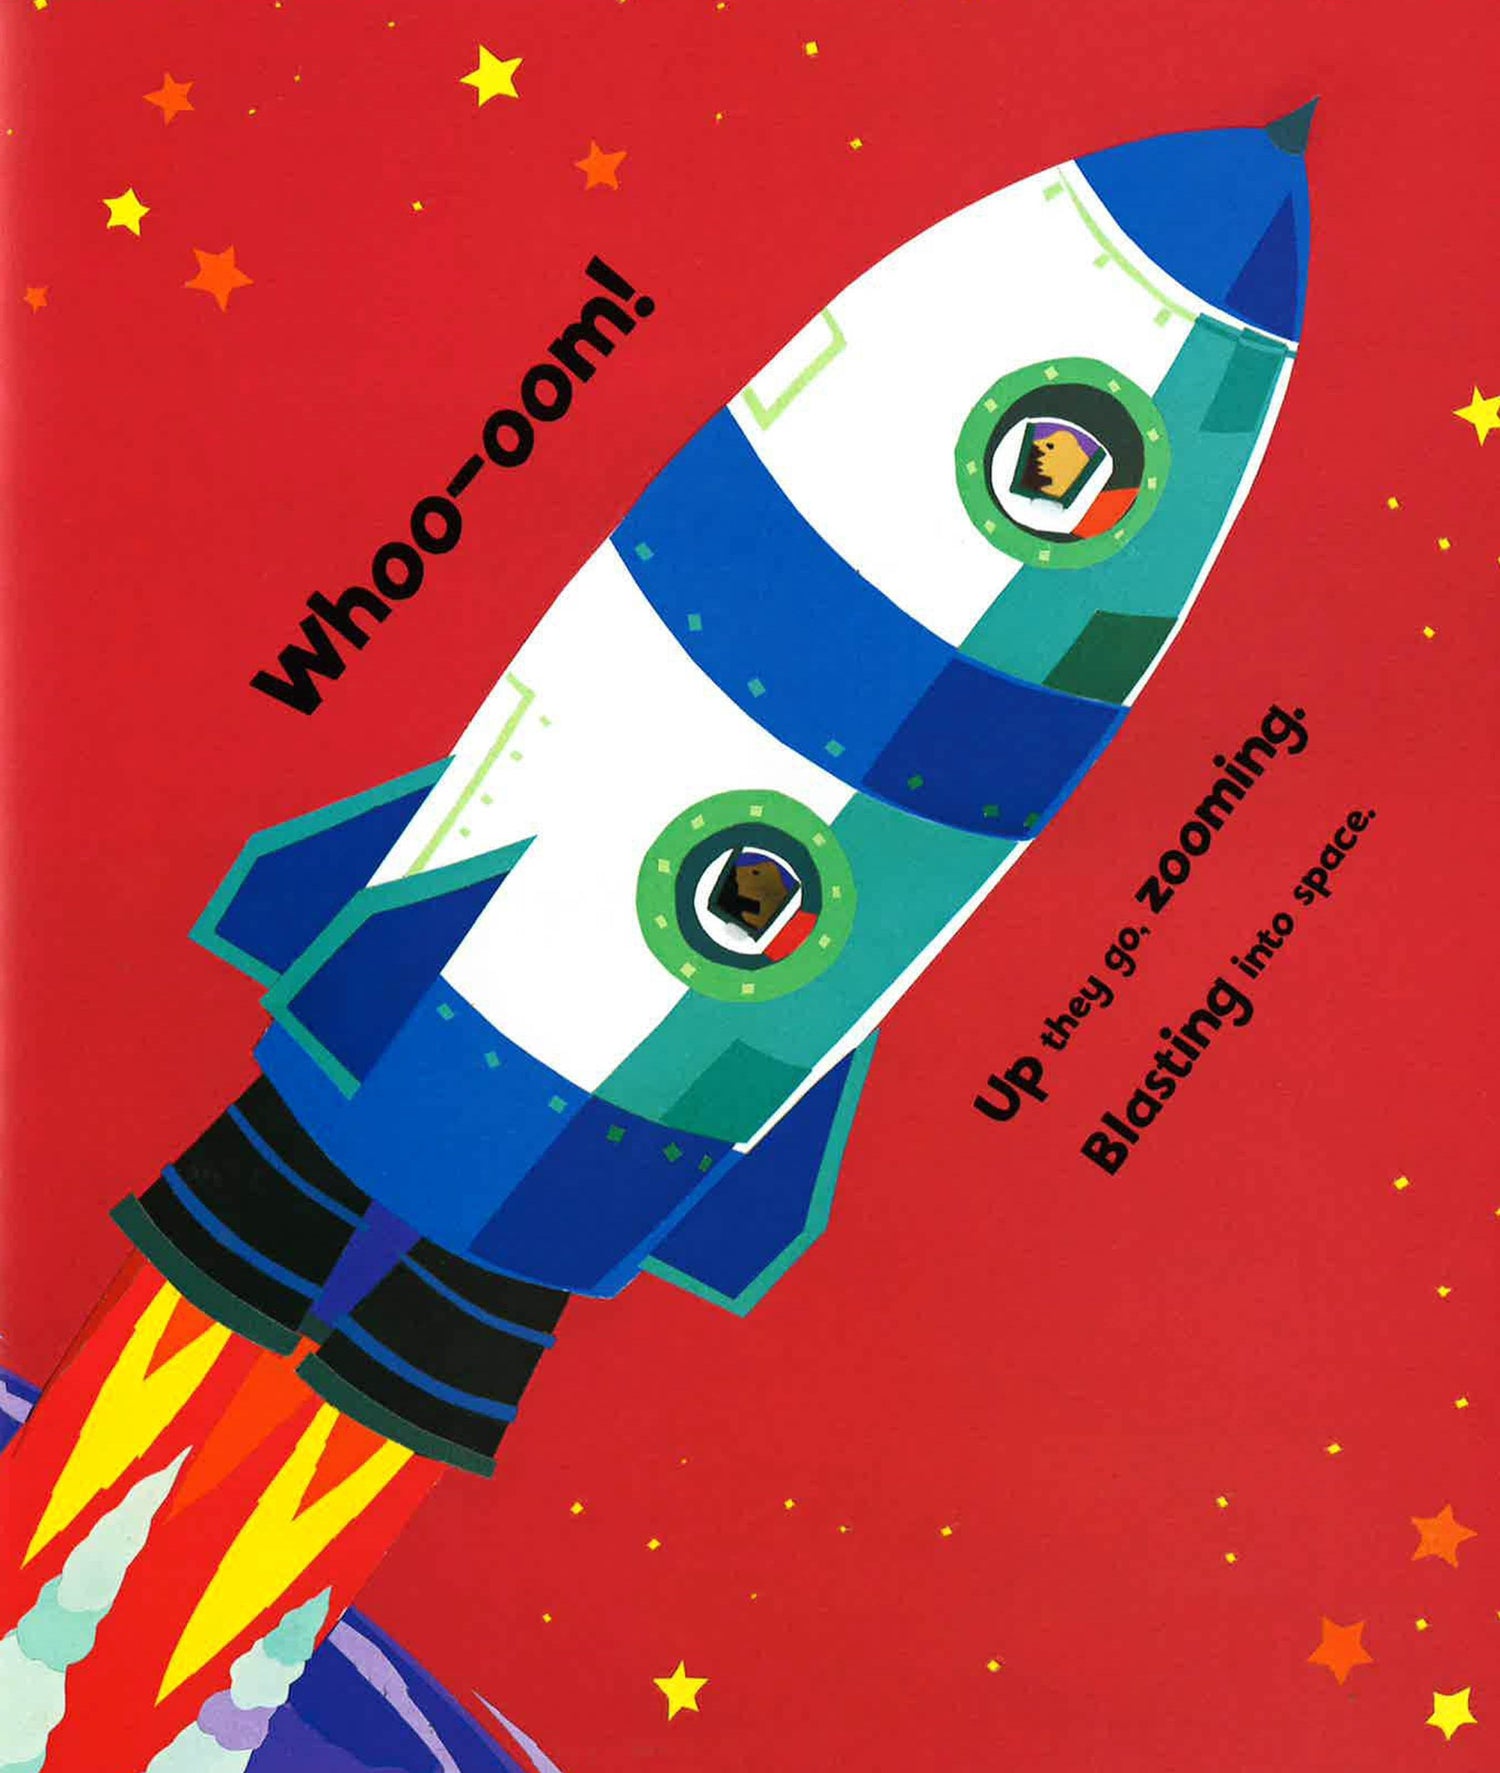 Zoom, Rocket, Zoom! (Awesome Engines) by Mayo, Margaret (2012